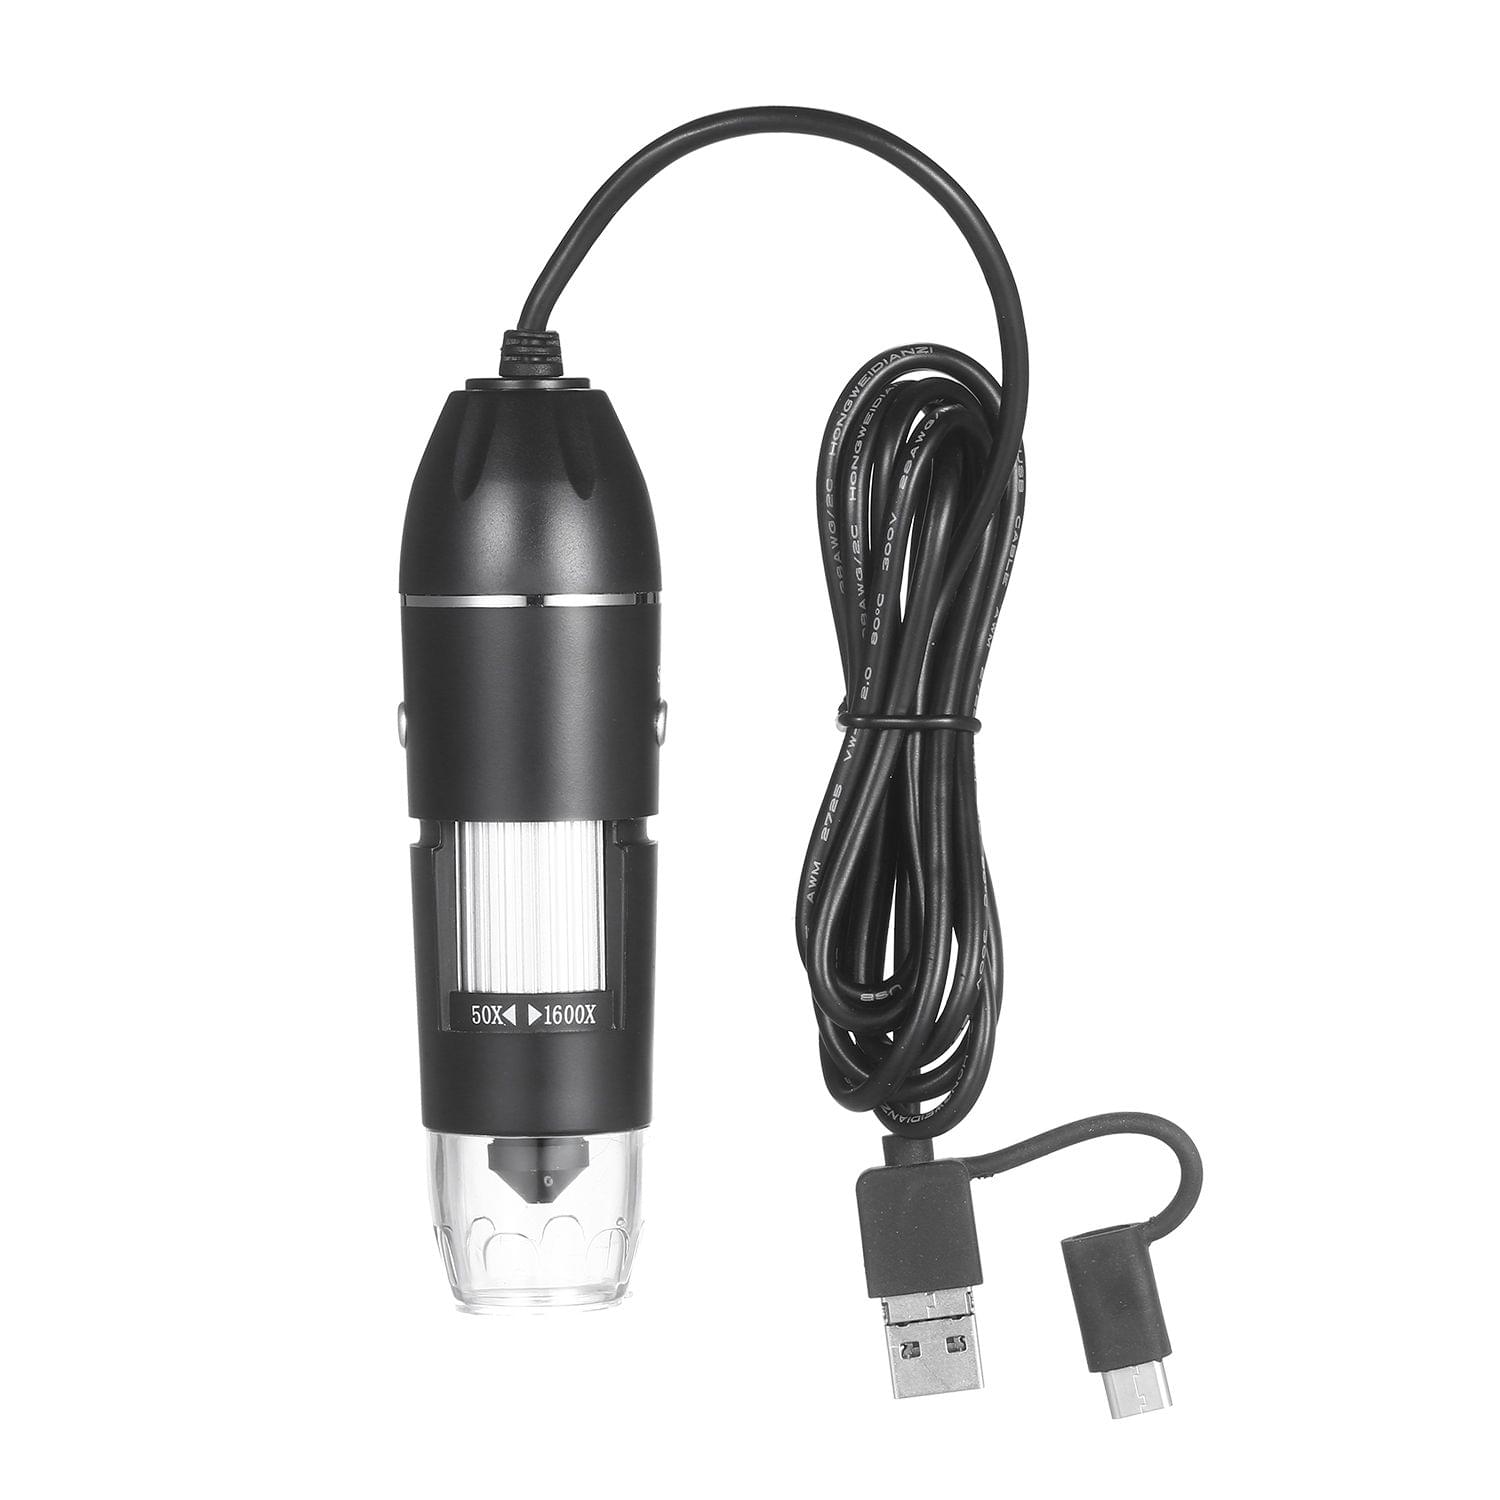 USB Digital Zoom Microscope Magnifier with OTG Function